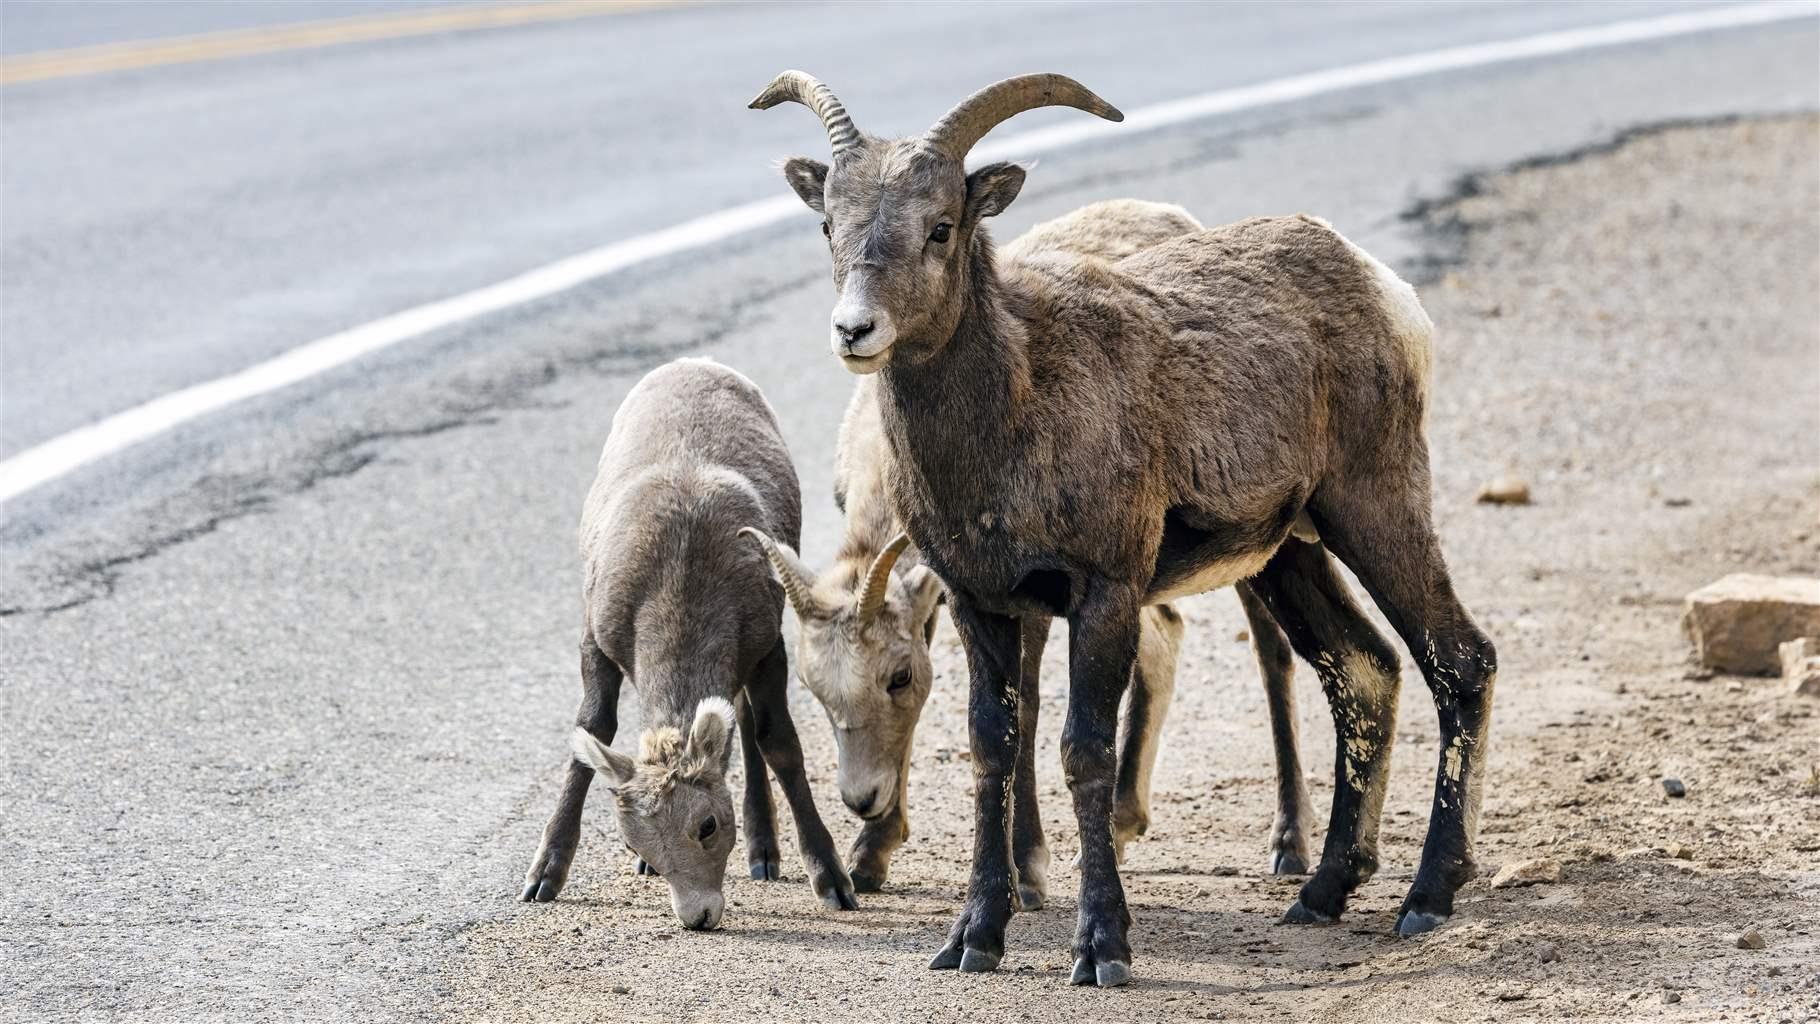 Rocky Mountain bighorn sheep seen near a road in northern New Mexico.